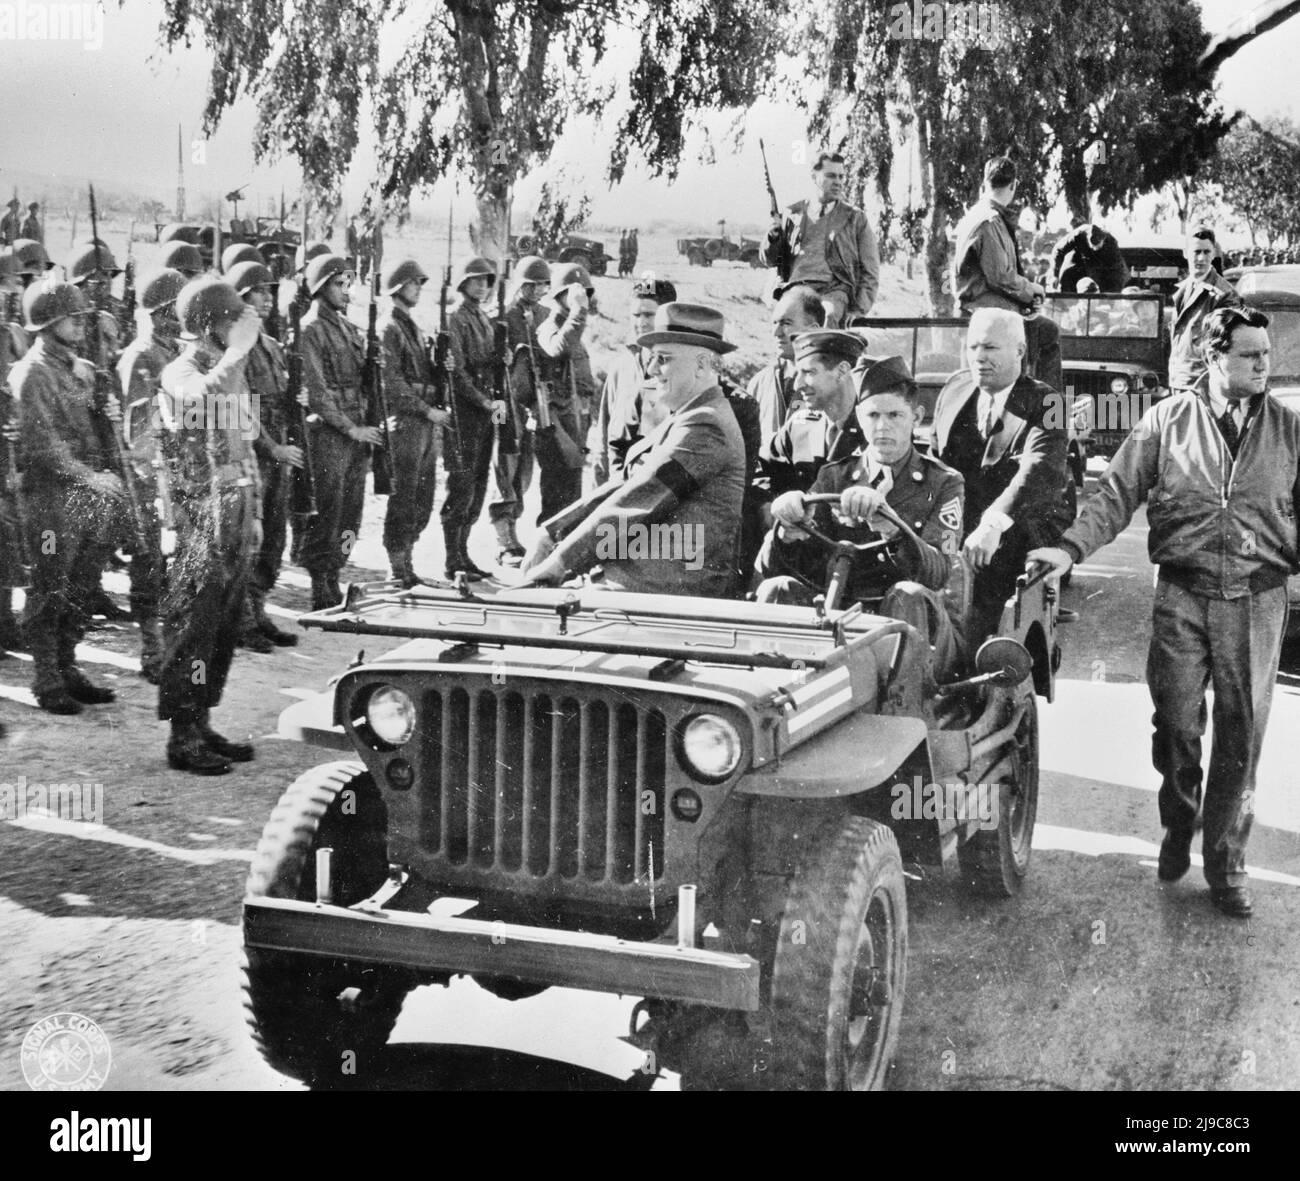 Casablanca, Morocco. President Franklin D. Roosevelt reviewing American troops. Staff Sergeant Oran Lass of Kansas City, Missouri, is driving the jeep - January 1943 Stock Photo